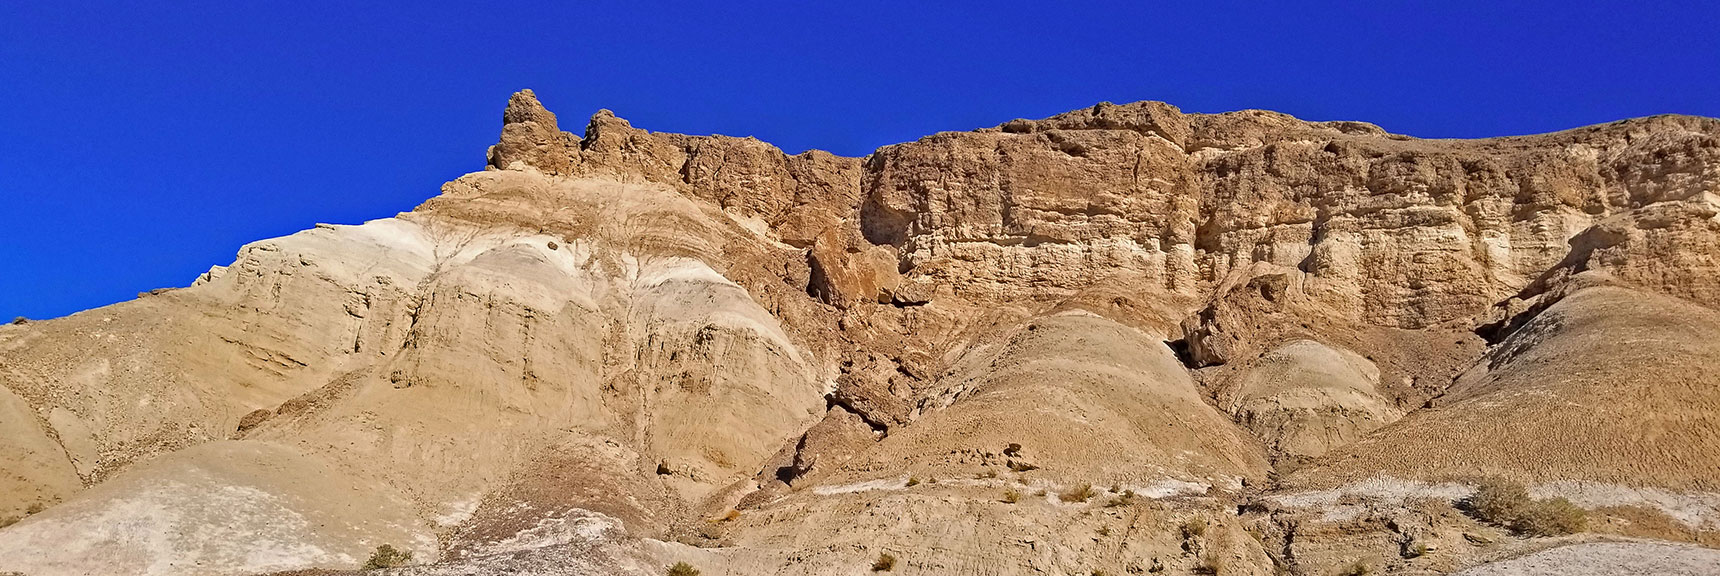 Arrival at Table Rock. Scary Cliff Approach Up Gully, Then Skirt Headwall Left to Arrive at Summit Opening | Tea House & Table Rock Circuit | Furnace Creek | Death Valley National Park, California